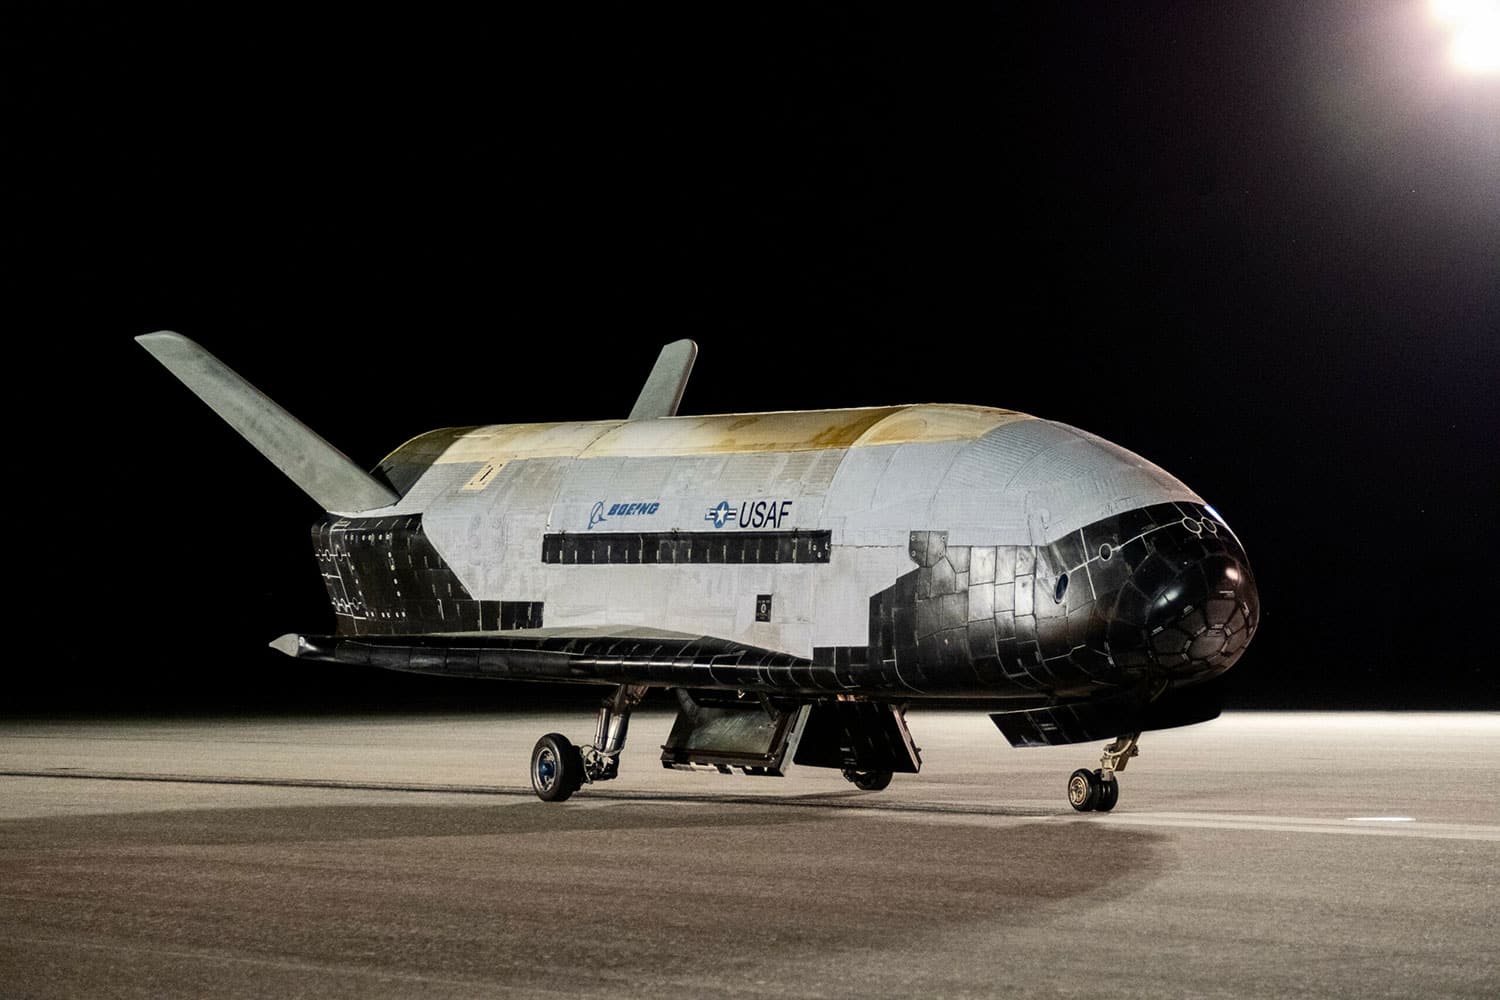 The United States Space Force prepares X-37B for launch.